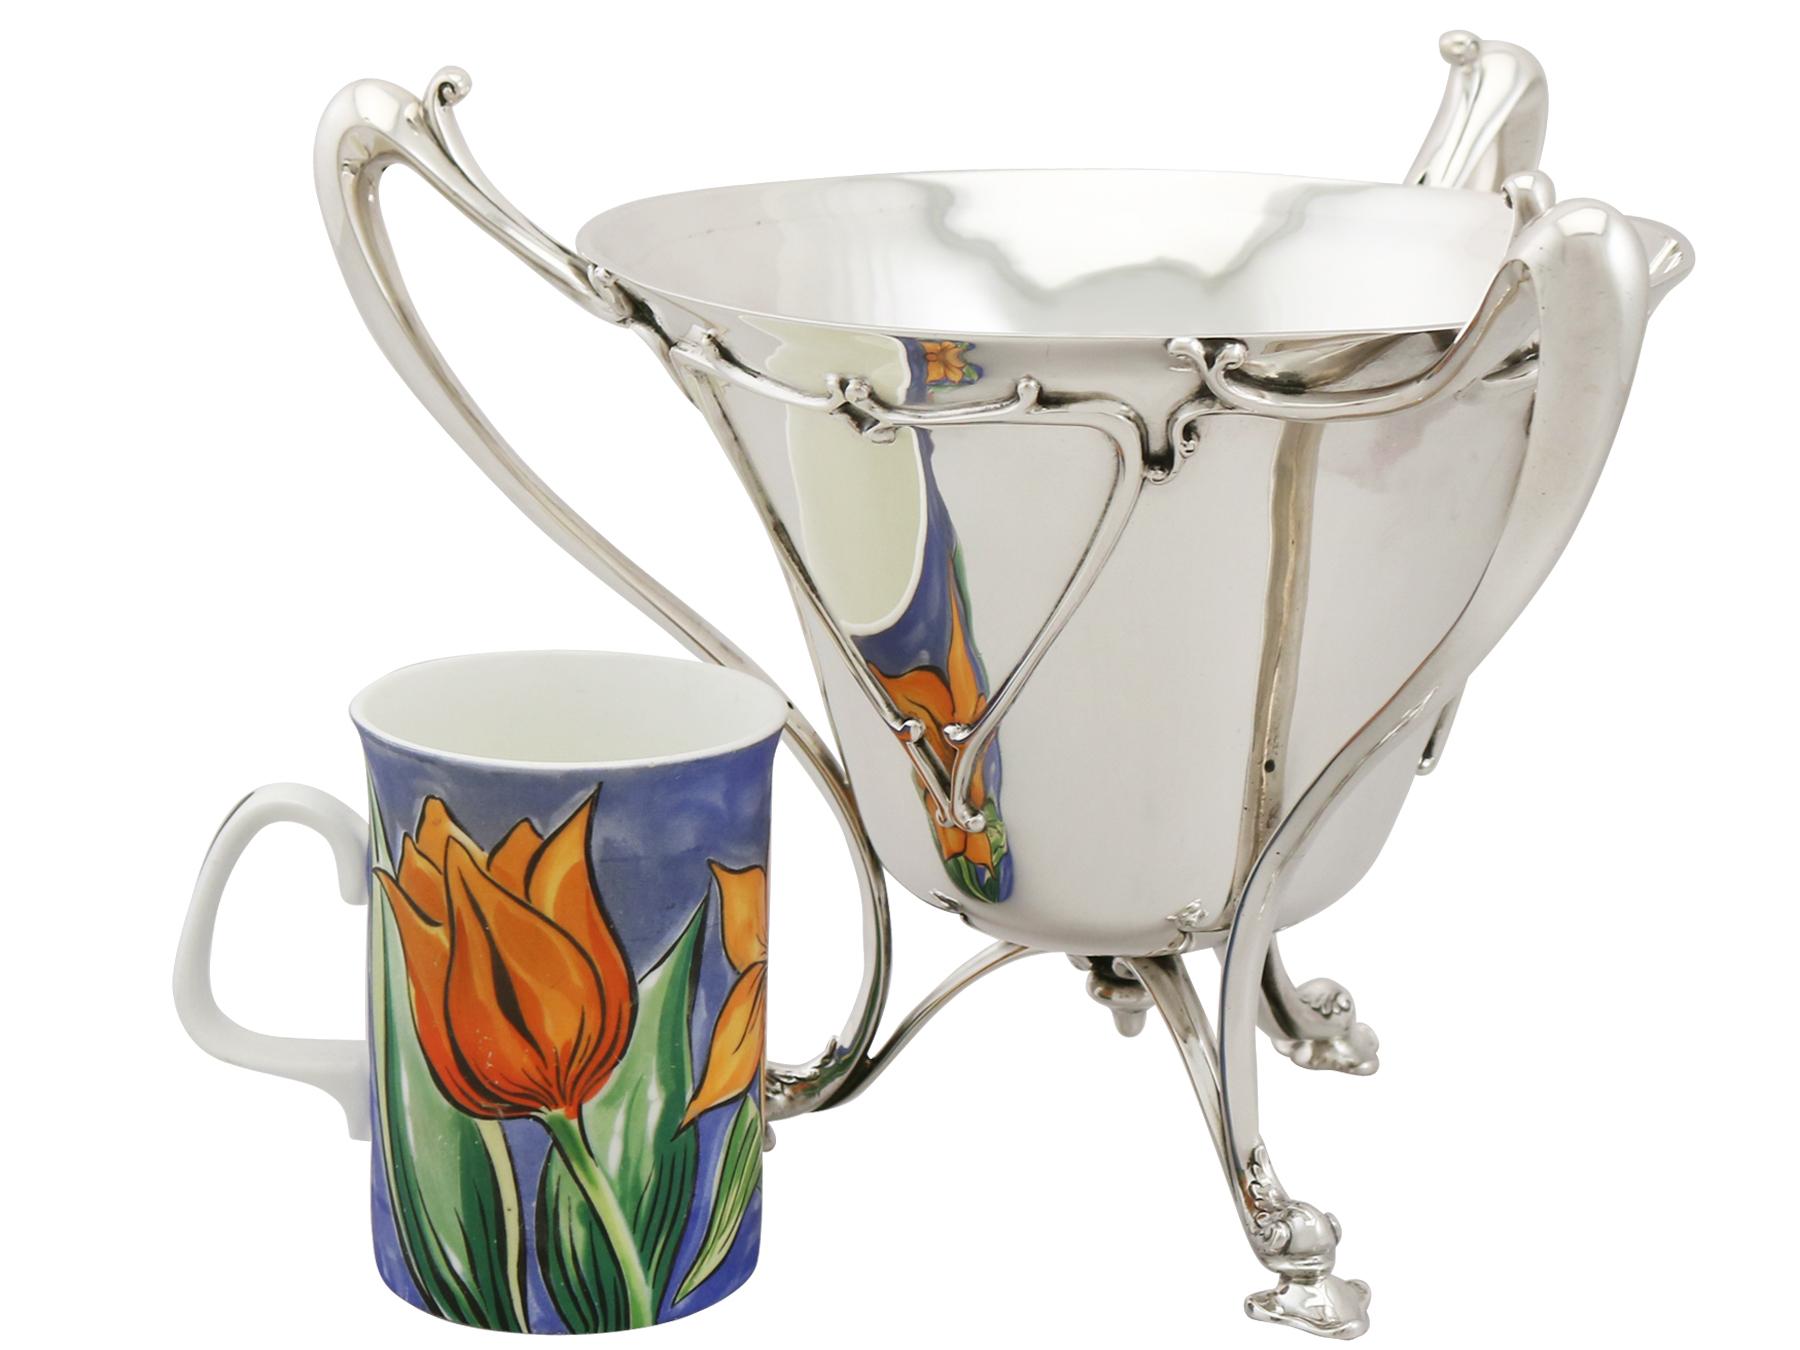 An exceptional, fine and impressive antique Edwardian English sterling silver tyg cup, made by Mappin & Webb Ltd in the Art Nouveau style; an addition to our ornamental silverware collection.

This exceptional antique sterling silver tyg cup has a